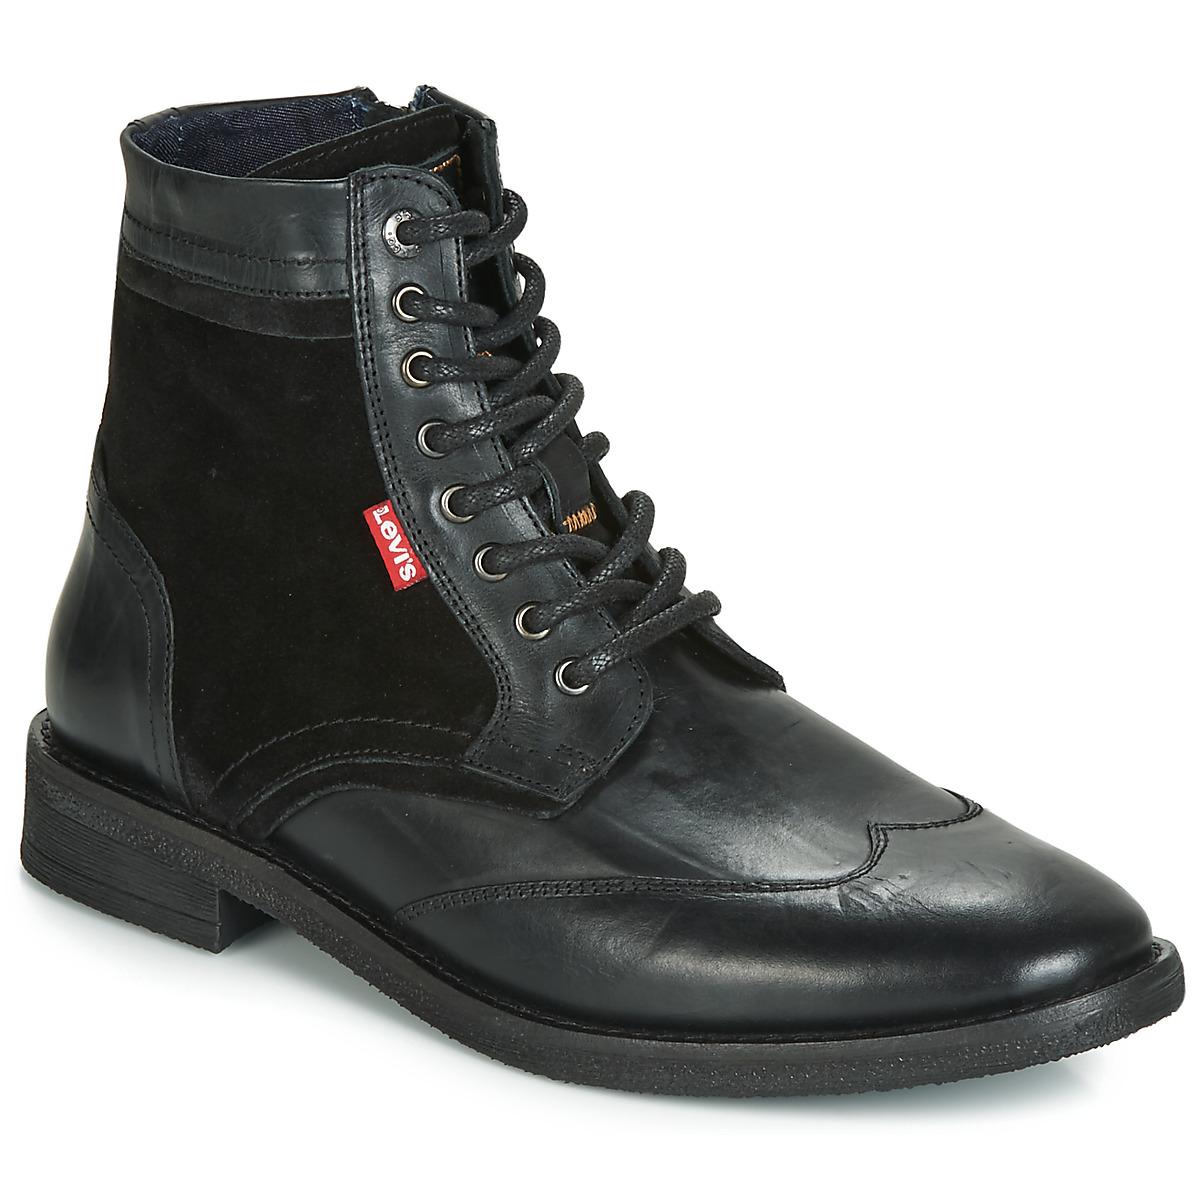 levis whitfield boots, Off 68%, www.iusarecords.com